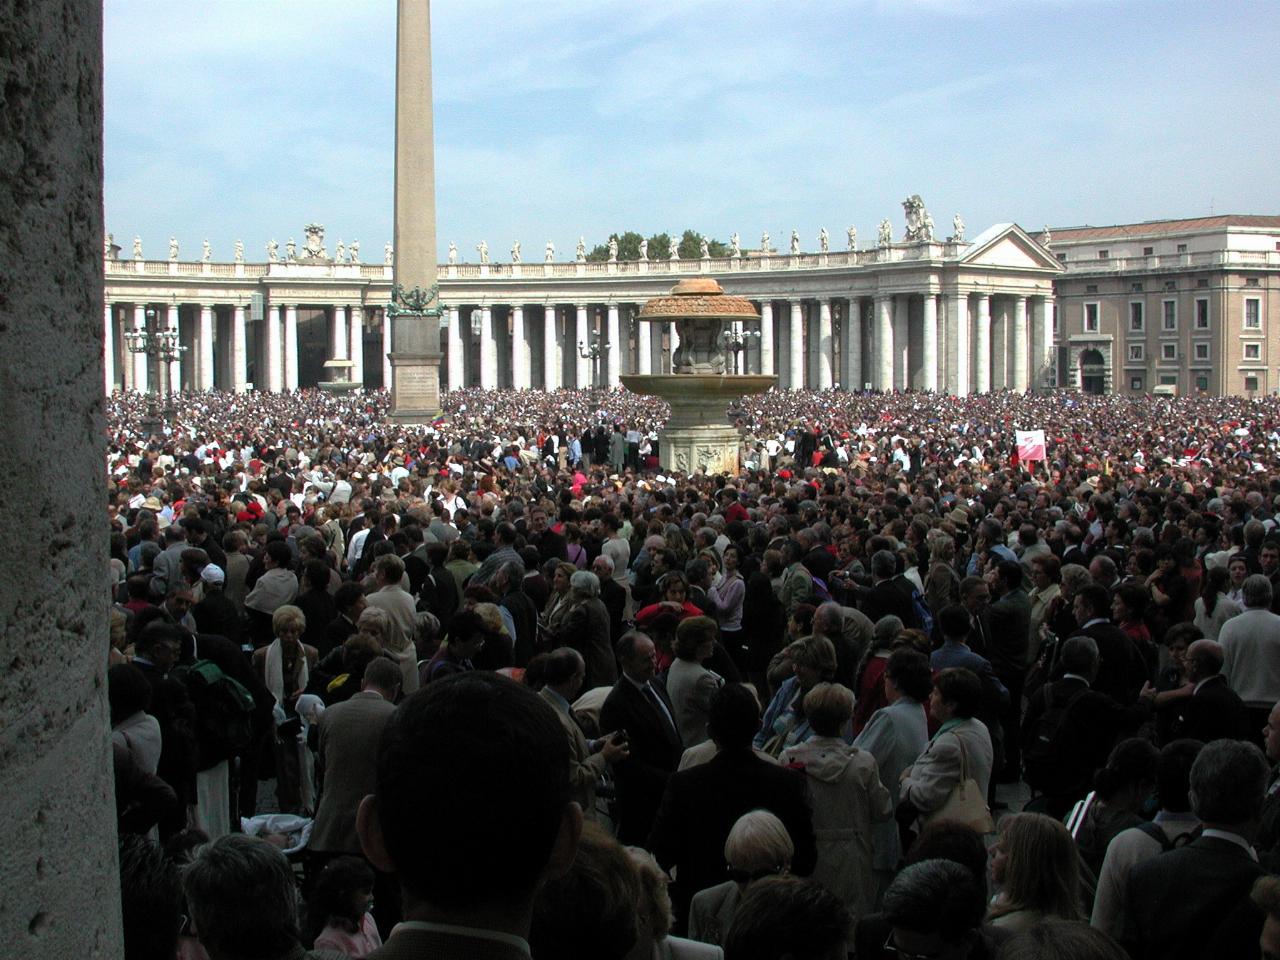 General view of the crowd in St. Peter's Piazza